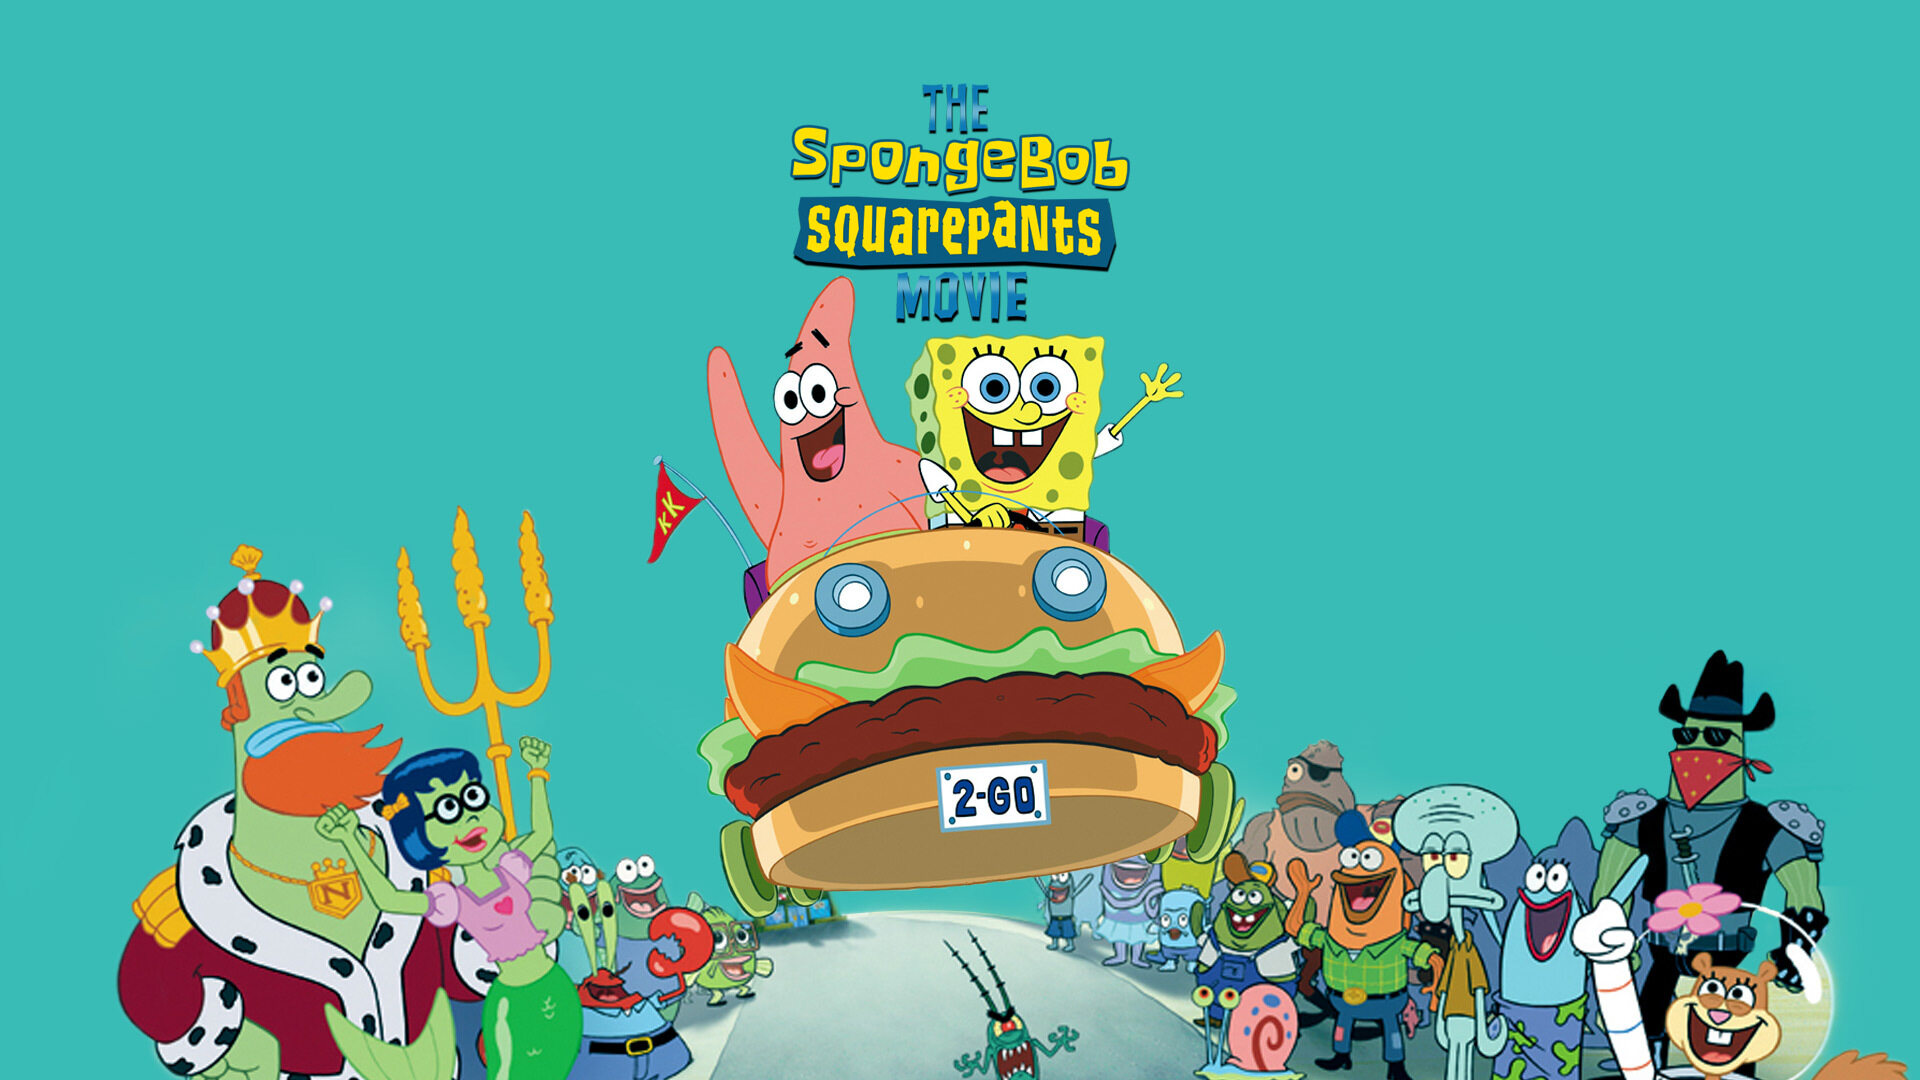 44-facts-about-the-movie-the-spongebob-squarepants-movie